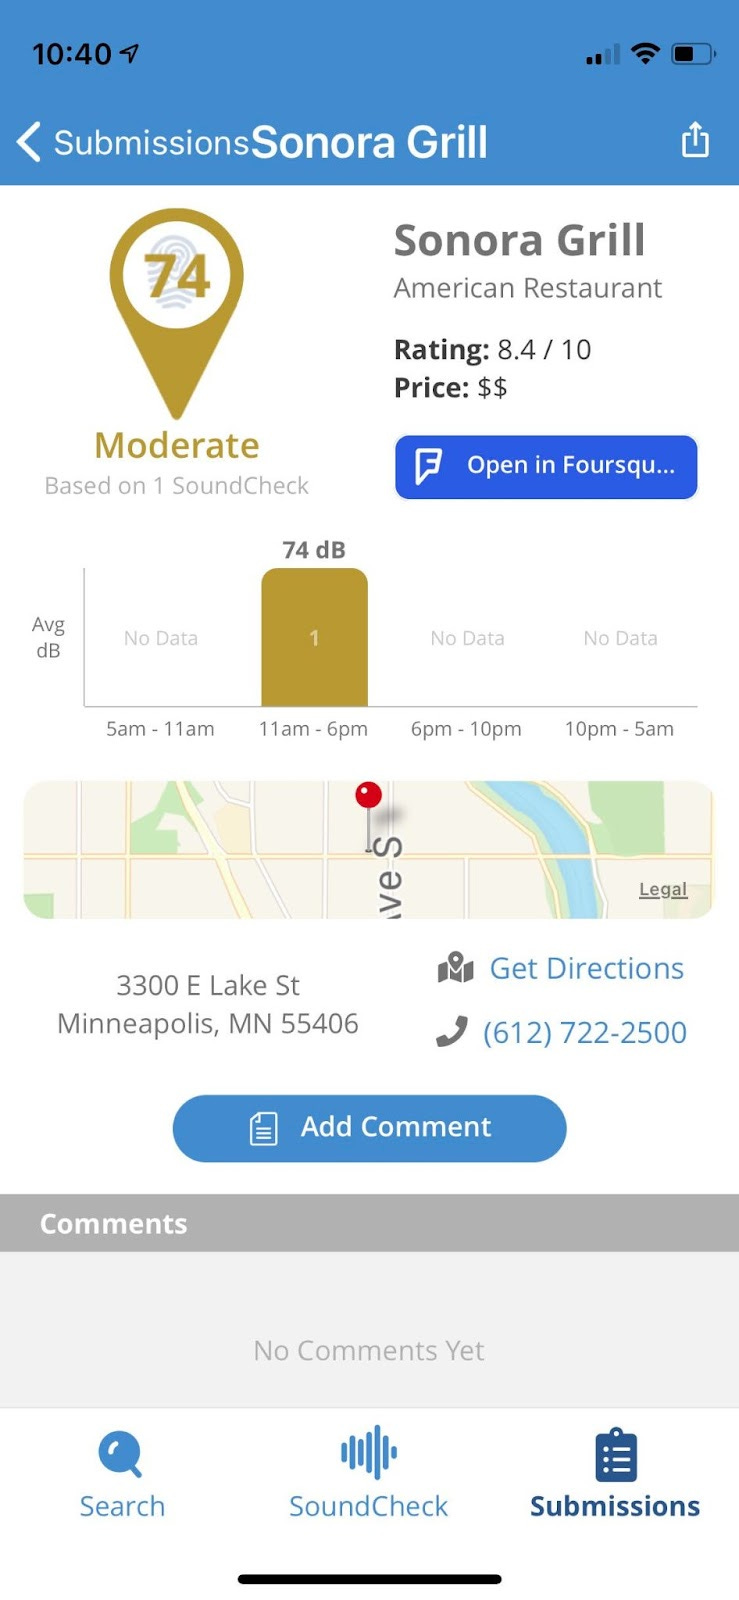 A map is now in the app screen with a red pin in the location of the restaurant chosen. The address and phone are listed of the establishment. There is also an option to add a comment. There is also a gold pin in the top left that states the average noise level.